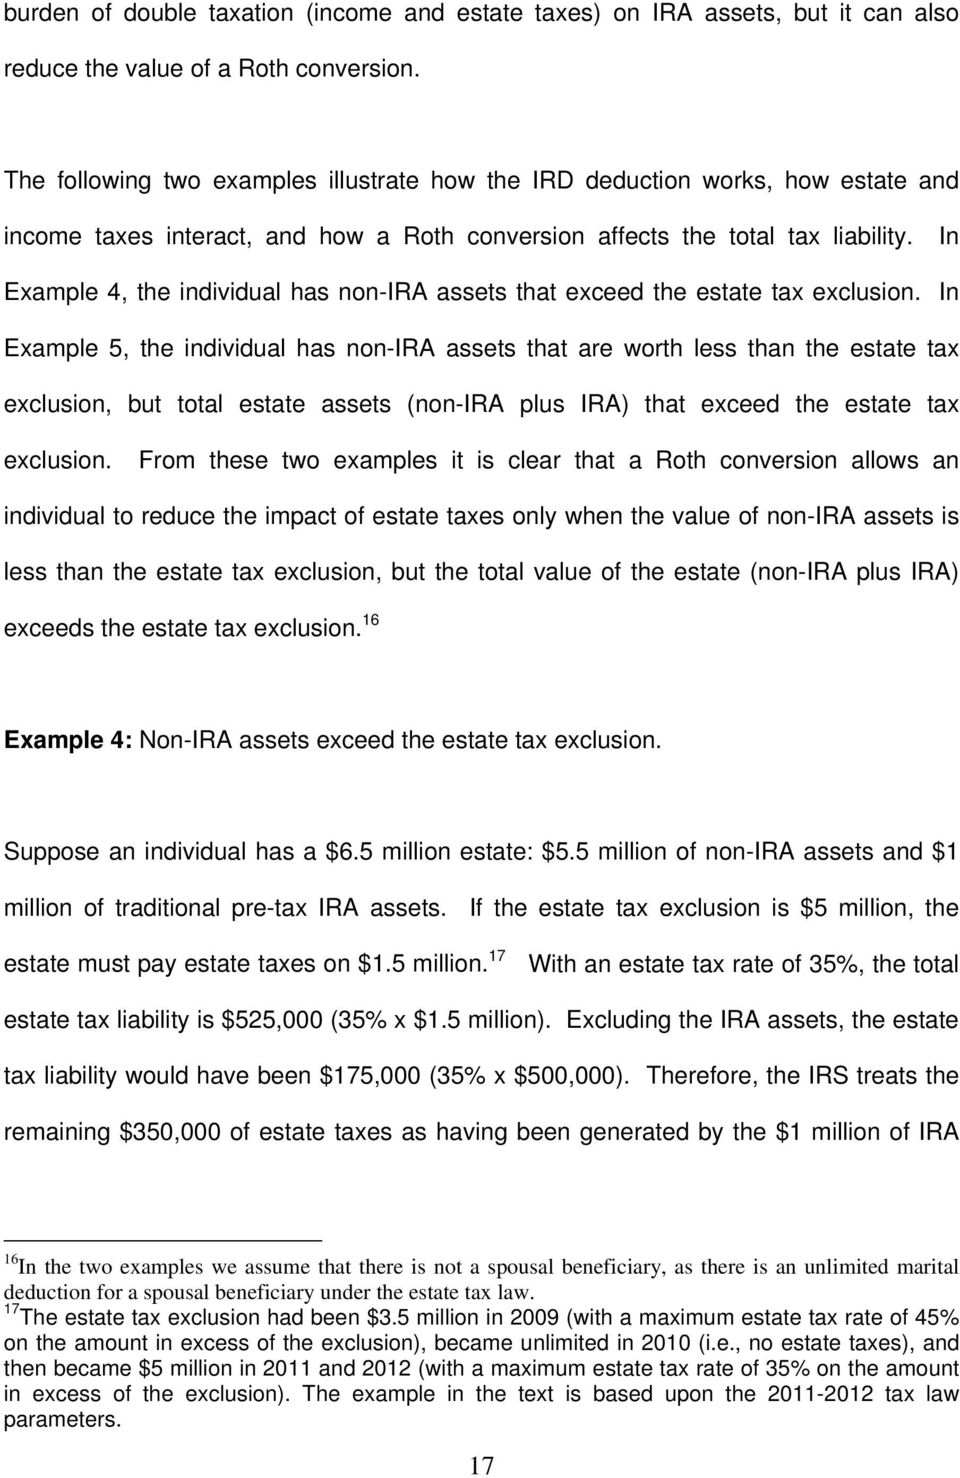 In Example 4, the individual has non-ira assets that exceed the estate tax exclusion.